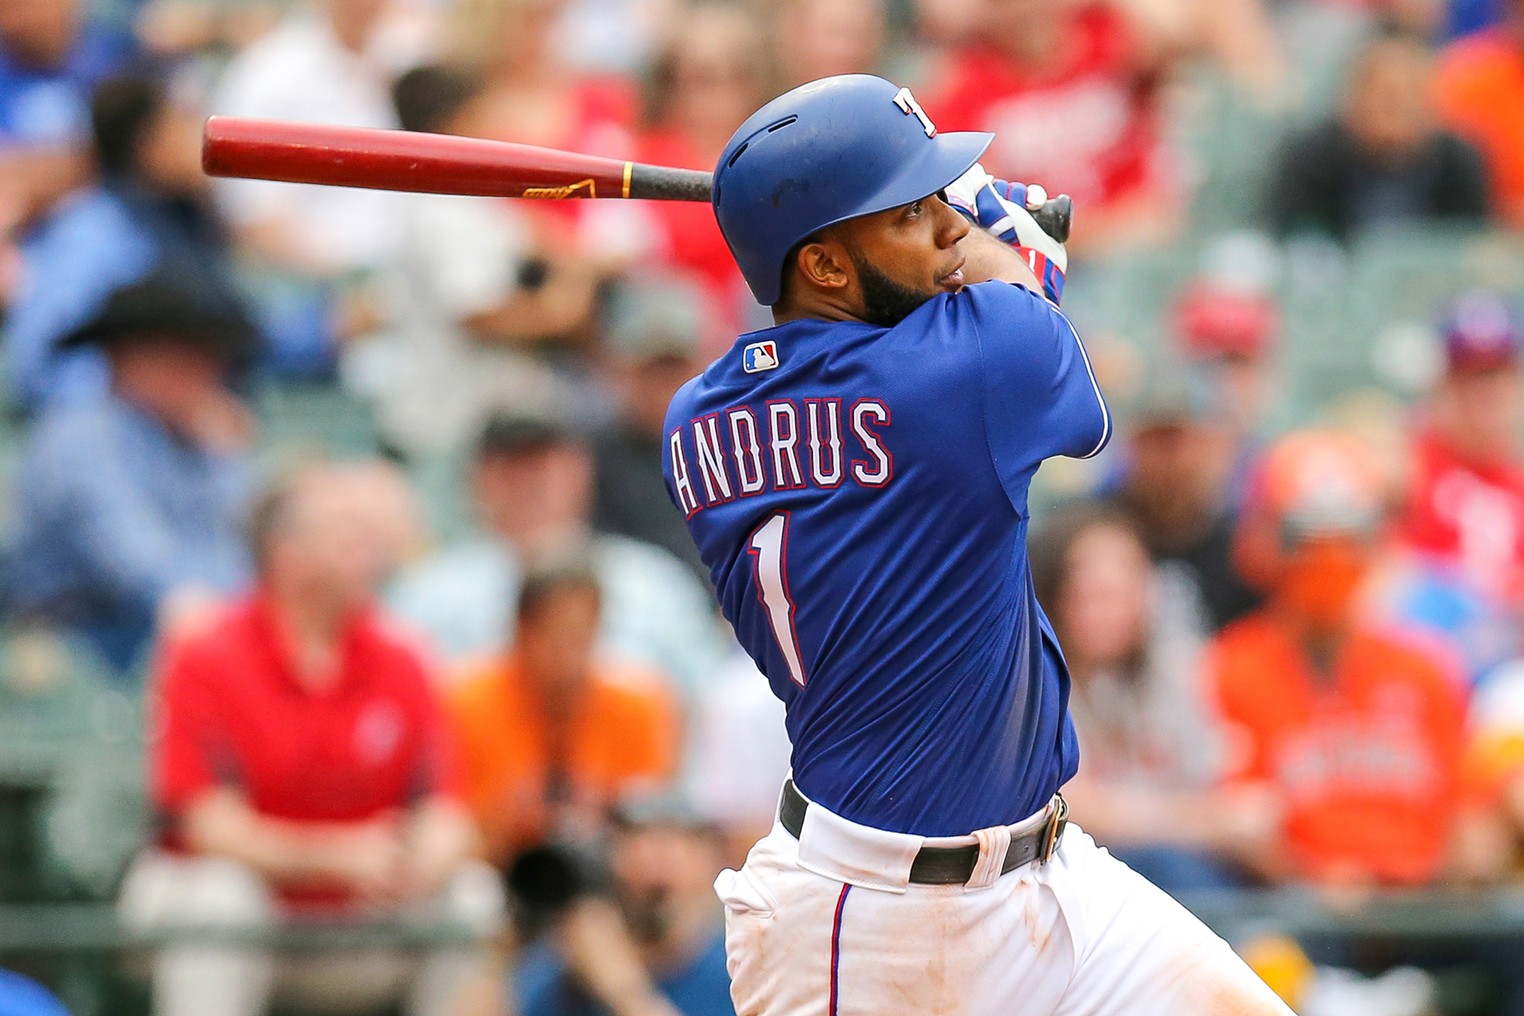 Texas Rangers recover after being humbled by Los Angeles Dodgers